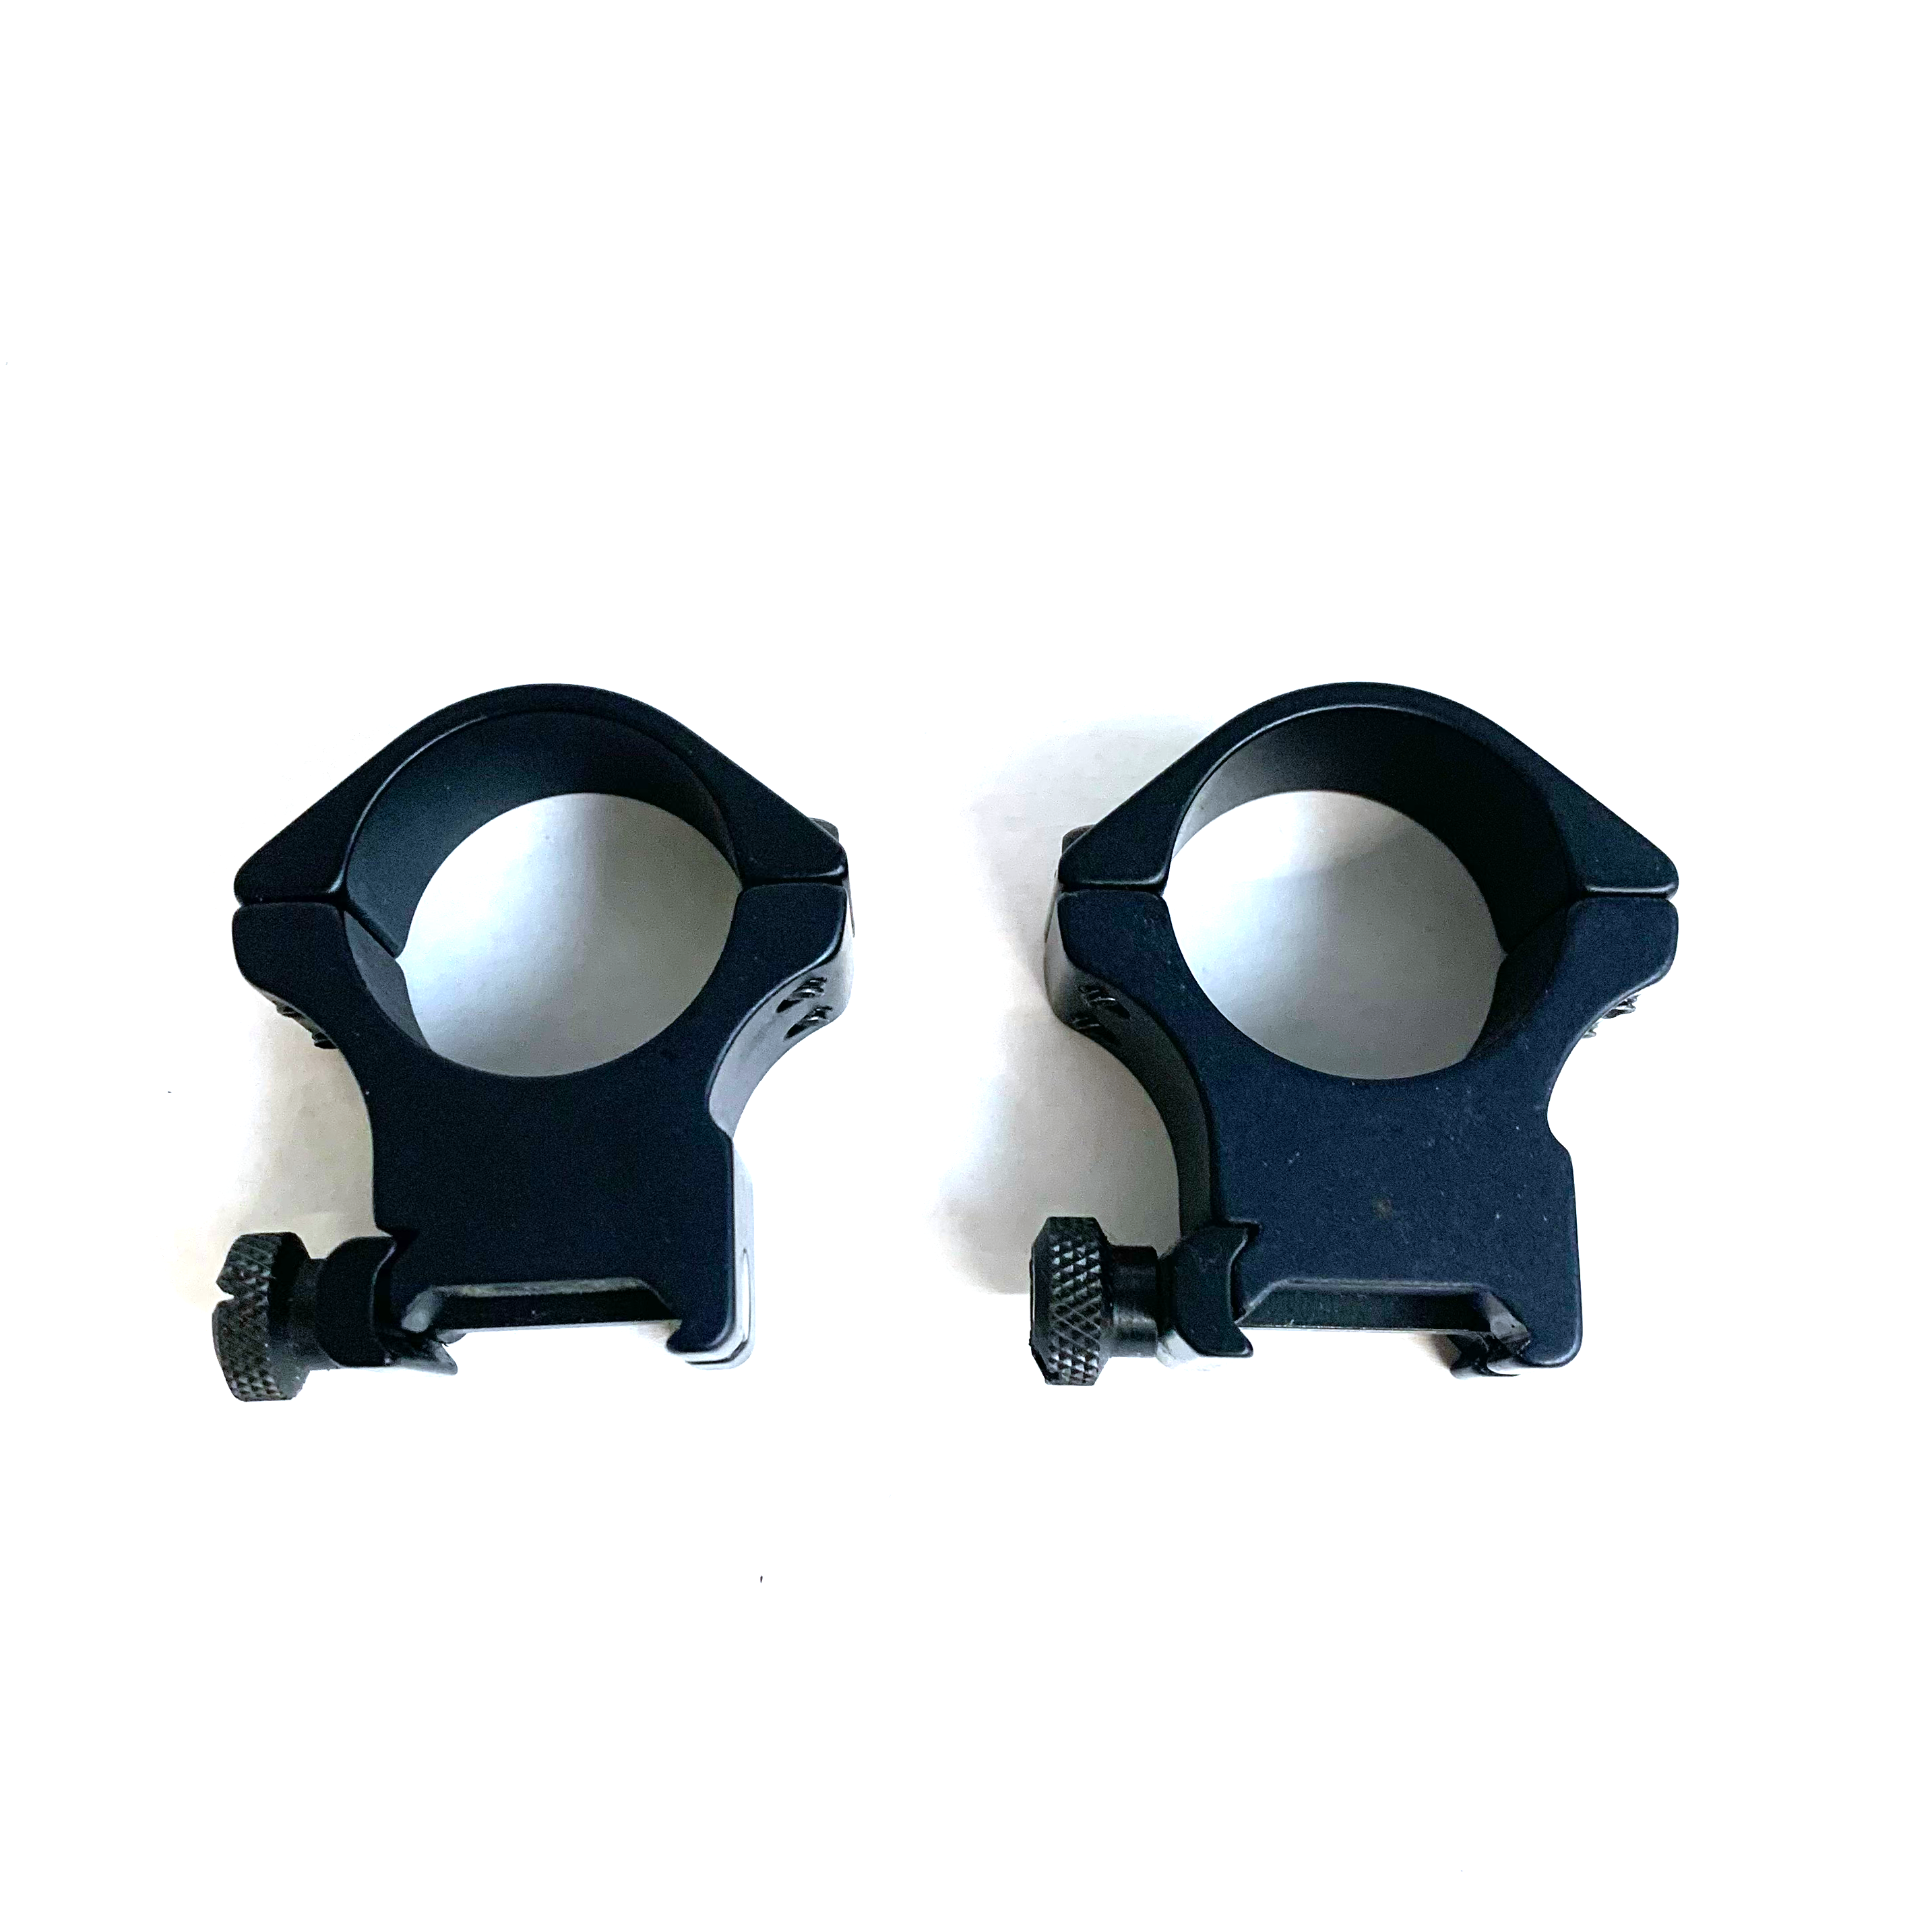 Sportsmatch 30mm Scope Rings - RPI Supplies